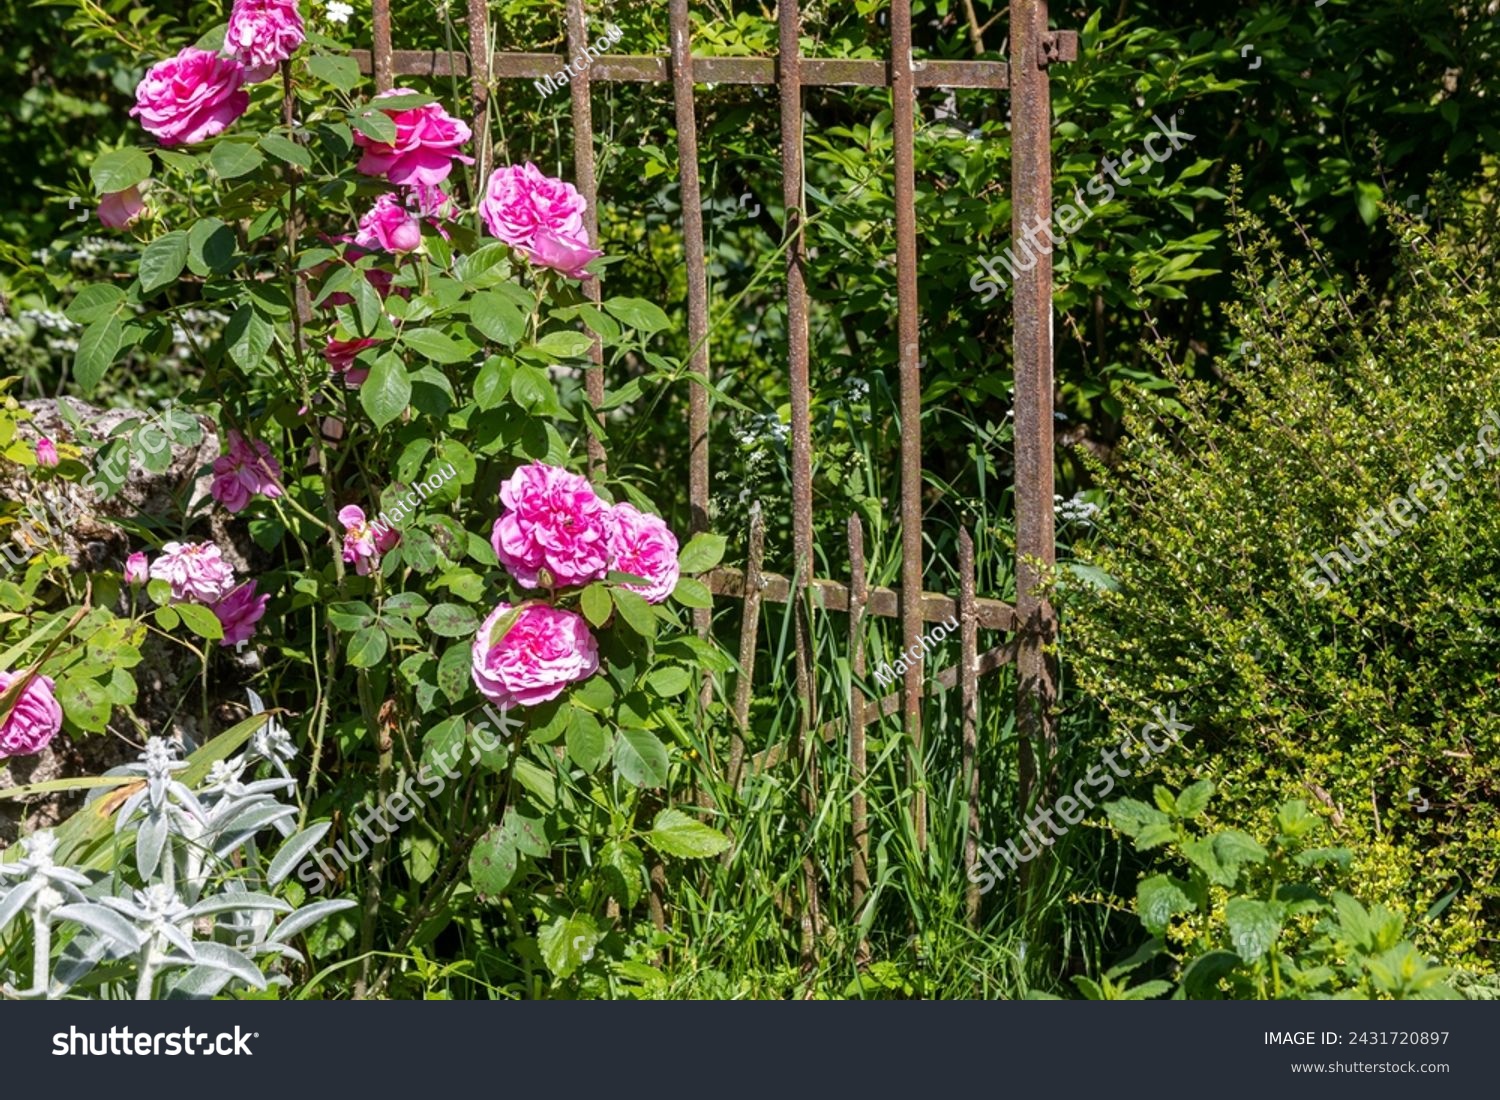 Bucolic scene in an old garden - Old roses in front of an old rusty iron gate #2431720897